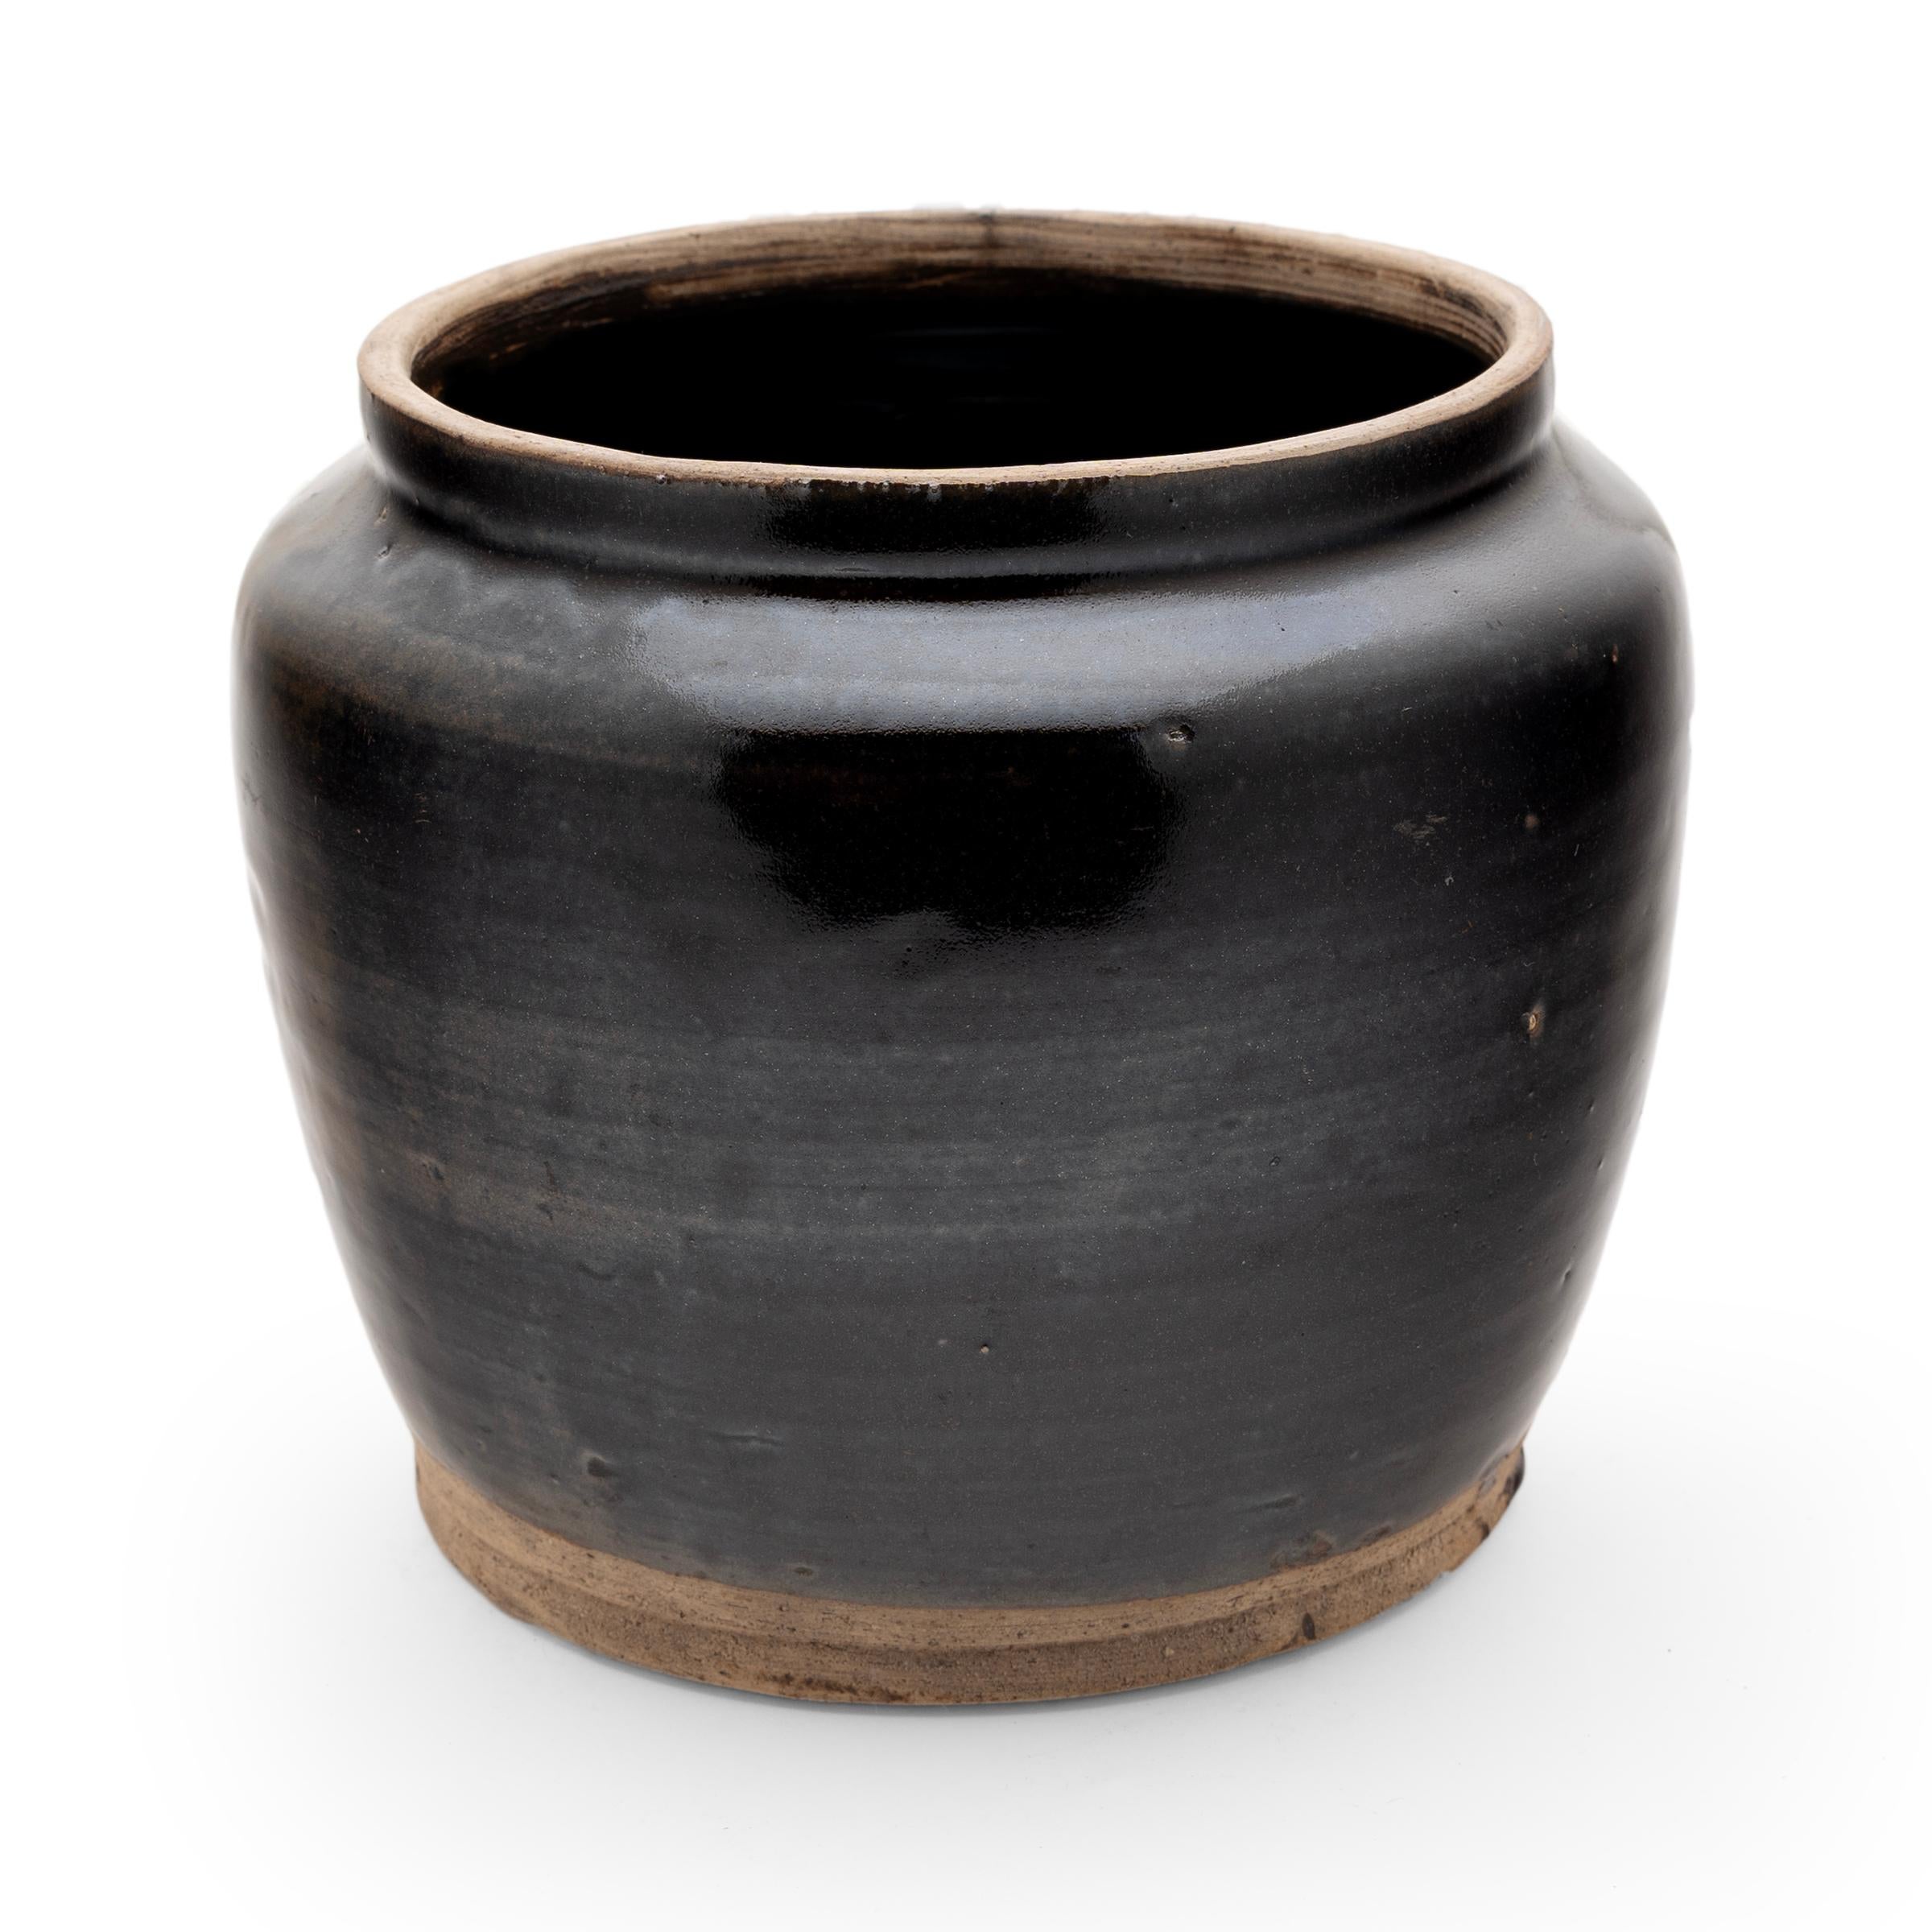 A glossy black glaze clings to the form of this small kitchen jar's banded surface. The glazed vessel dates to the early 20th-century and was used for storing food and condiments in a provincial Qing-dynasty kitchen, as evidenced by its interior